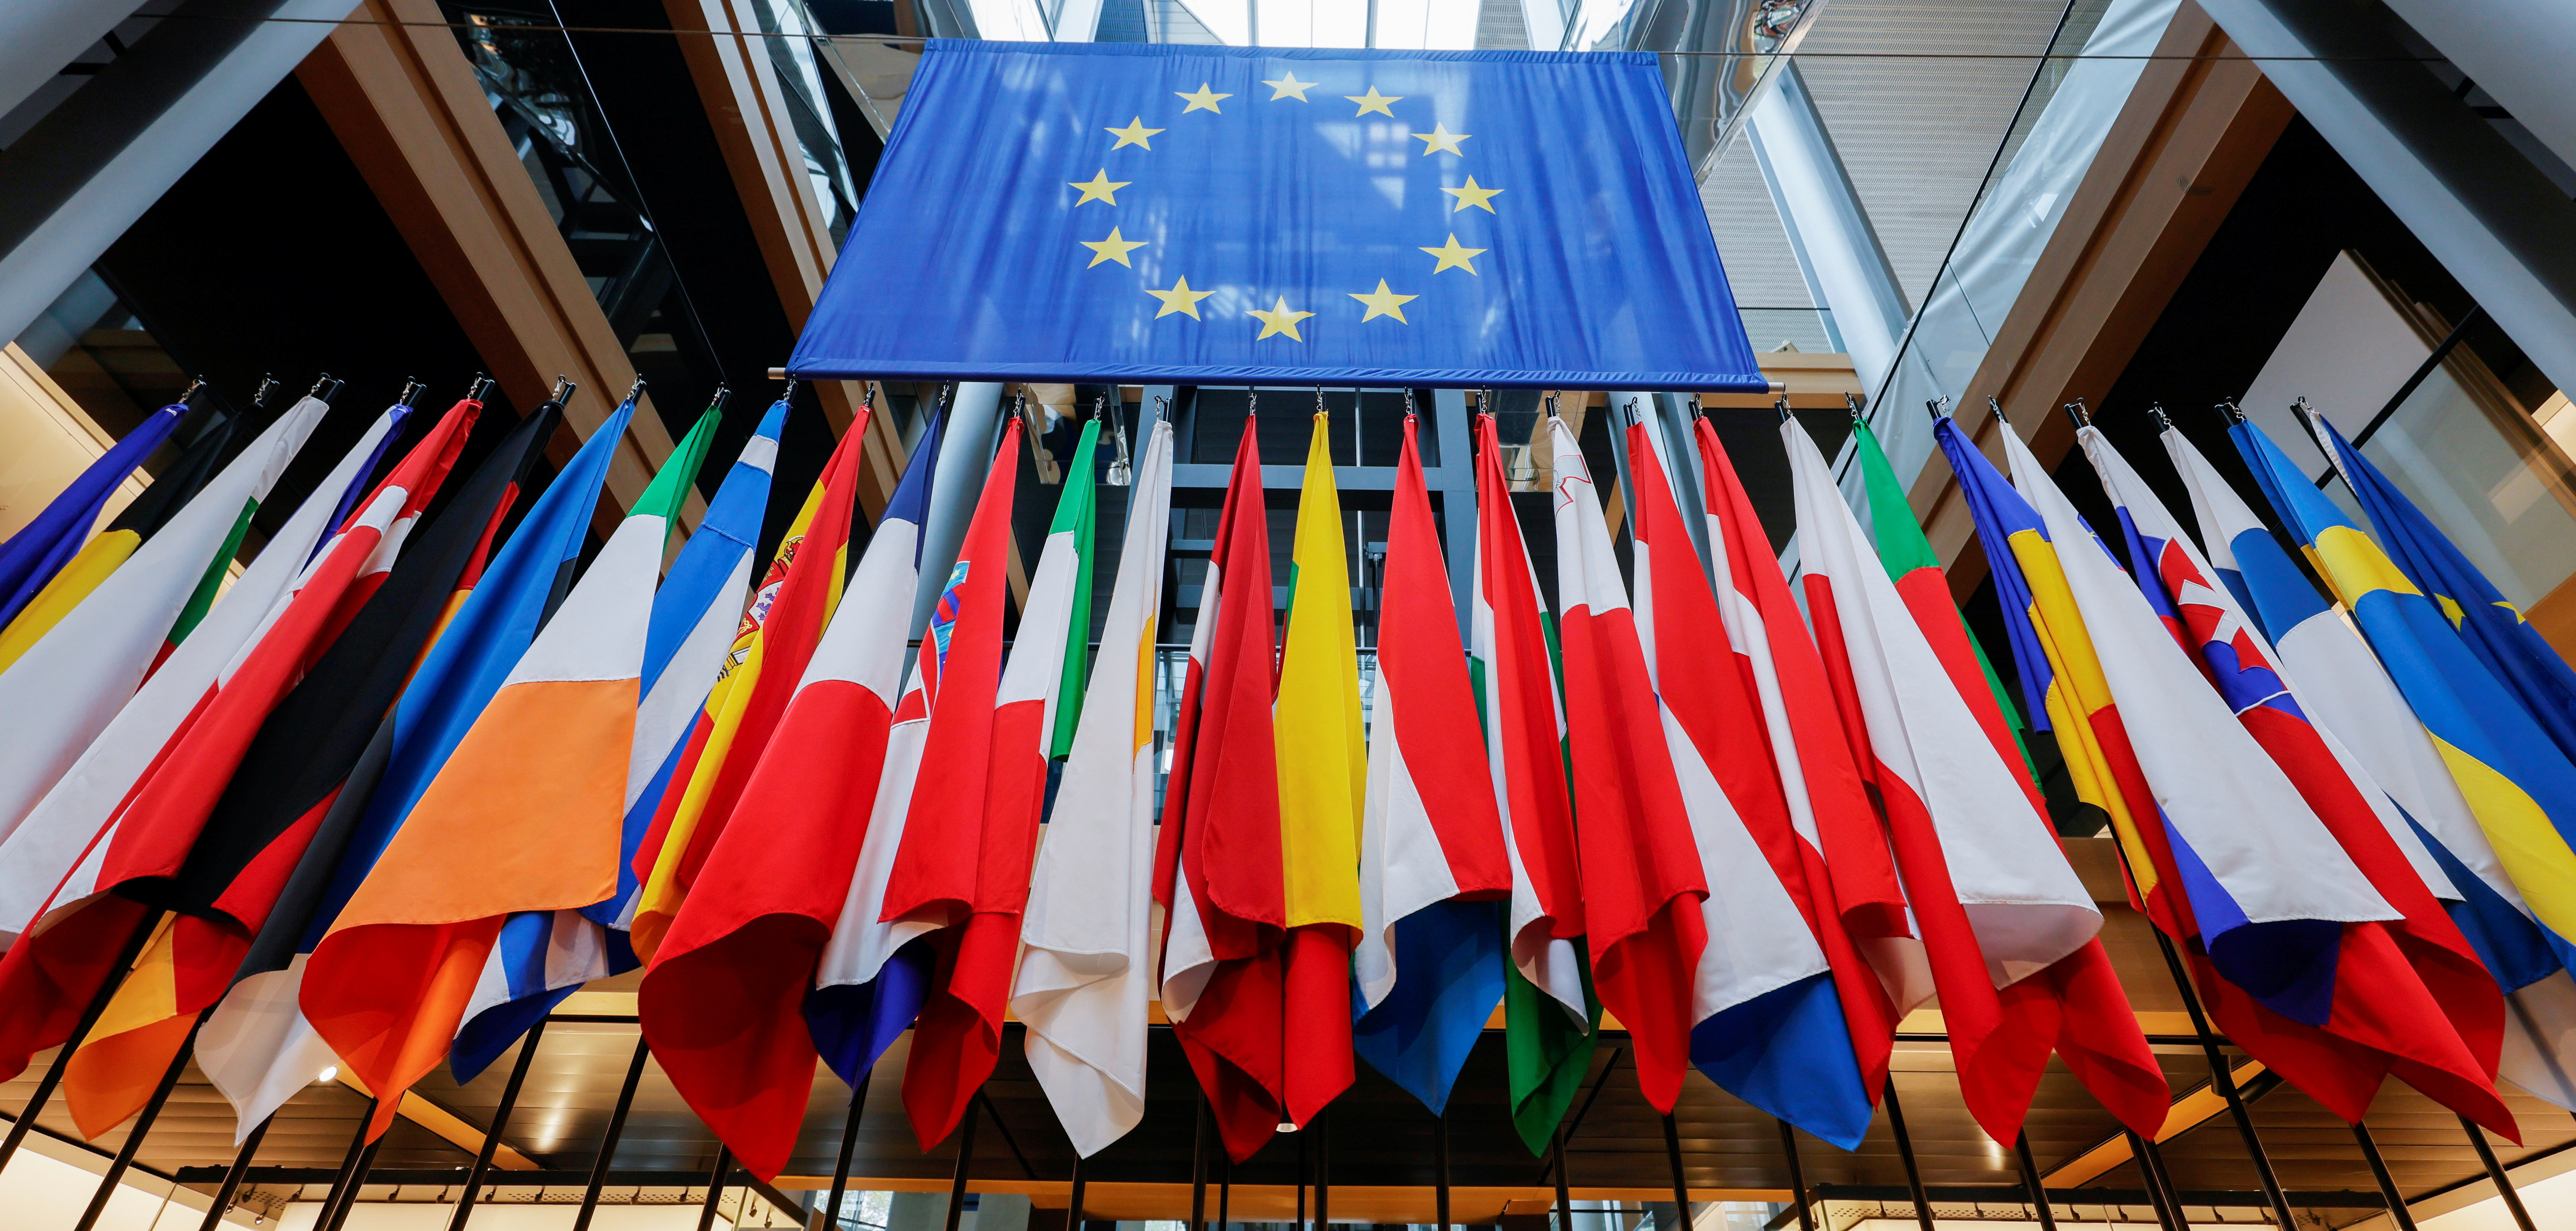 A view of different flags of the European Union Members during a debate on Poland's challenge to the supremacy of EU laws at the European Parliament, in Strasbourg